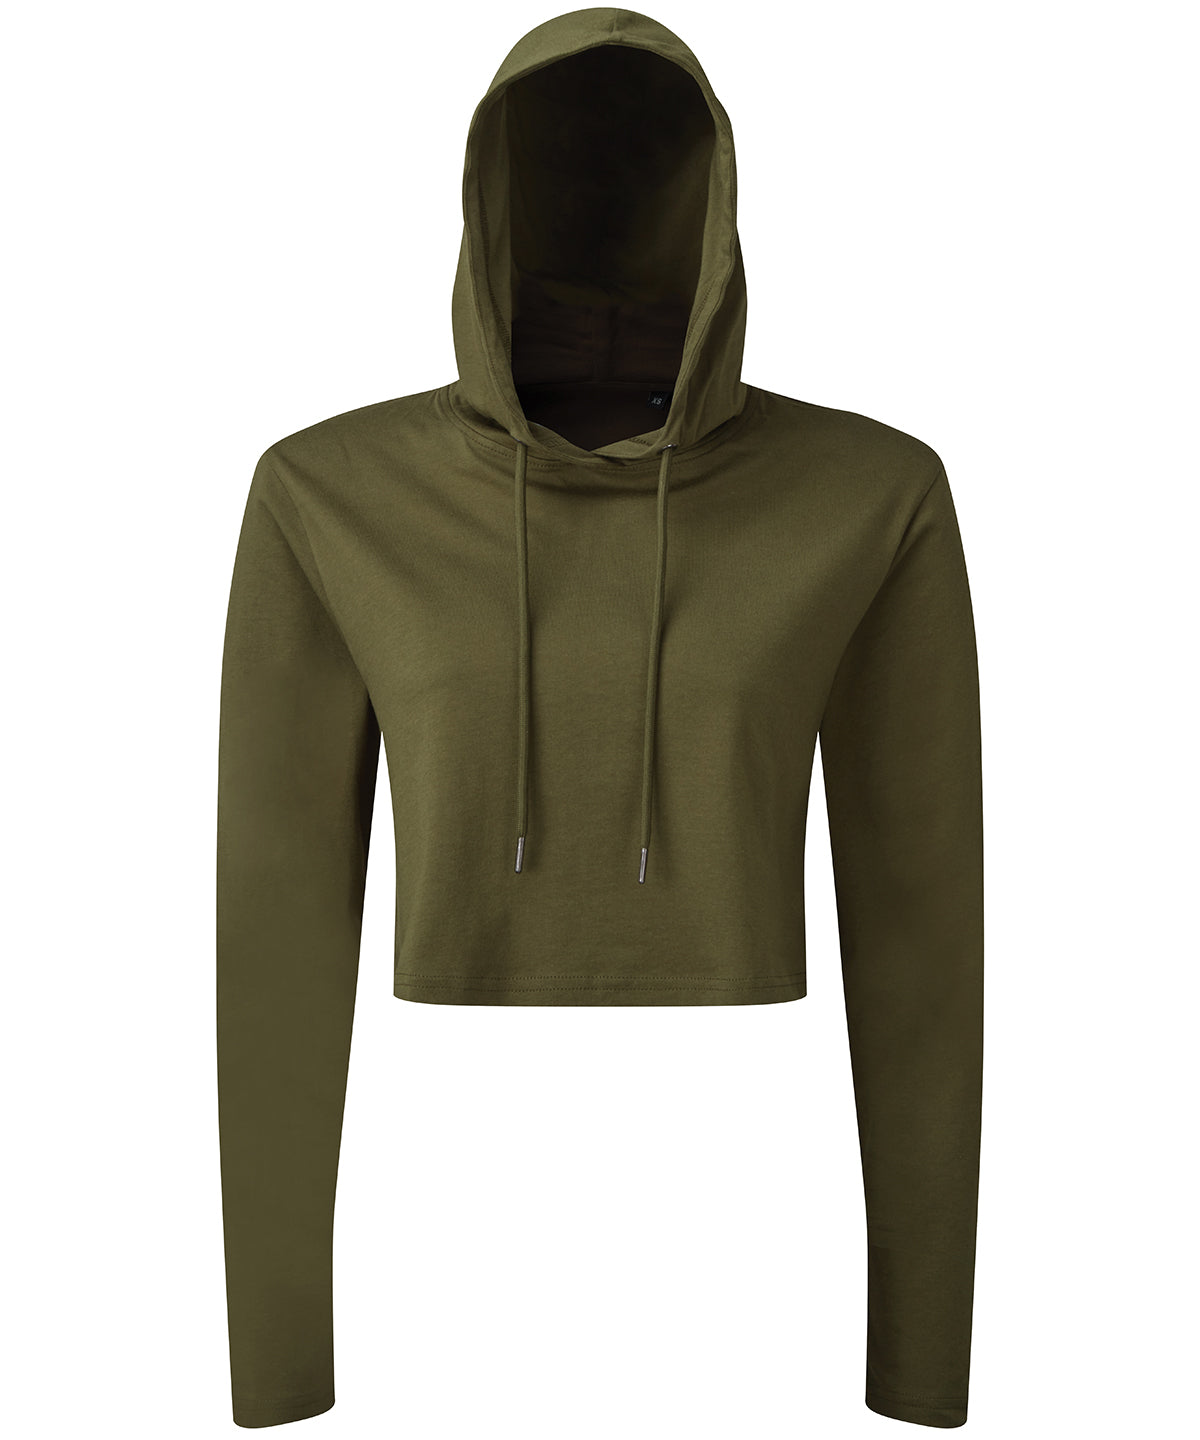 Olive - Women's TriDri® cropped hooded long sleeve t-shirt Hoodies TriDri® Activewear & Performance, Back to the Gym, Exclusives, Gymwear, Lounge Sets, Must Haves, Raladeal - Recently Added, Rebrandable, Sports & Leisure, T-Shirts & Vests, Tracksuits, Trending, Trending Loungewear Schoolwear Centres